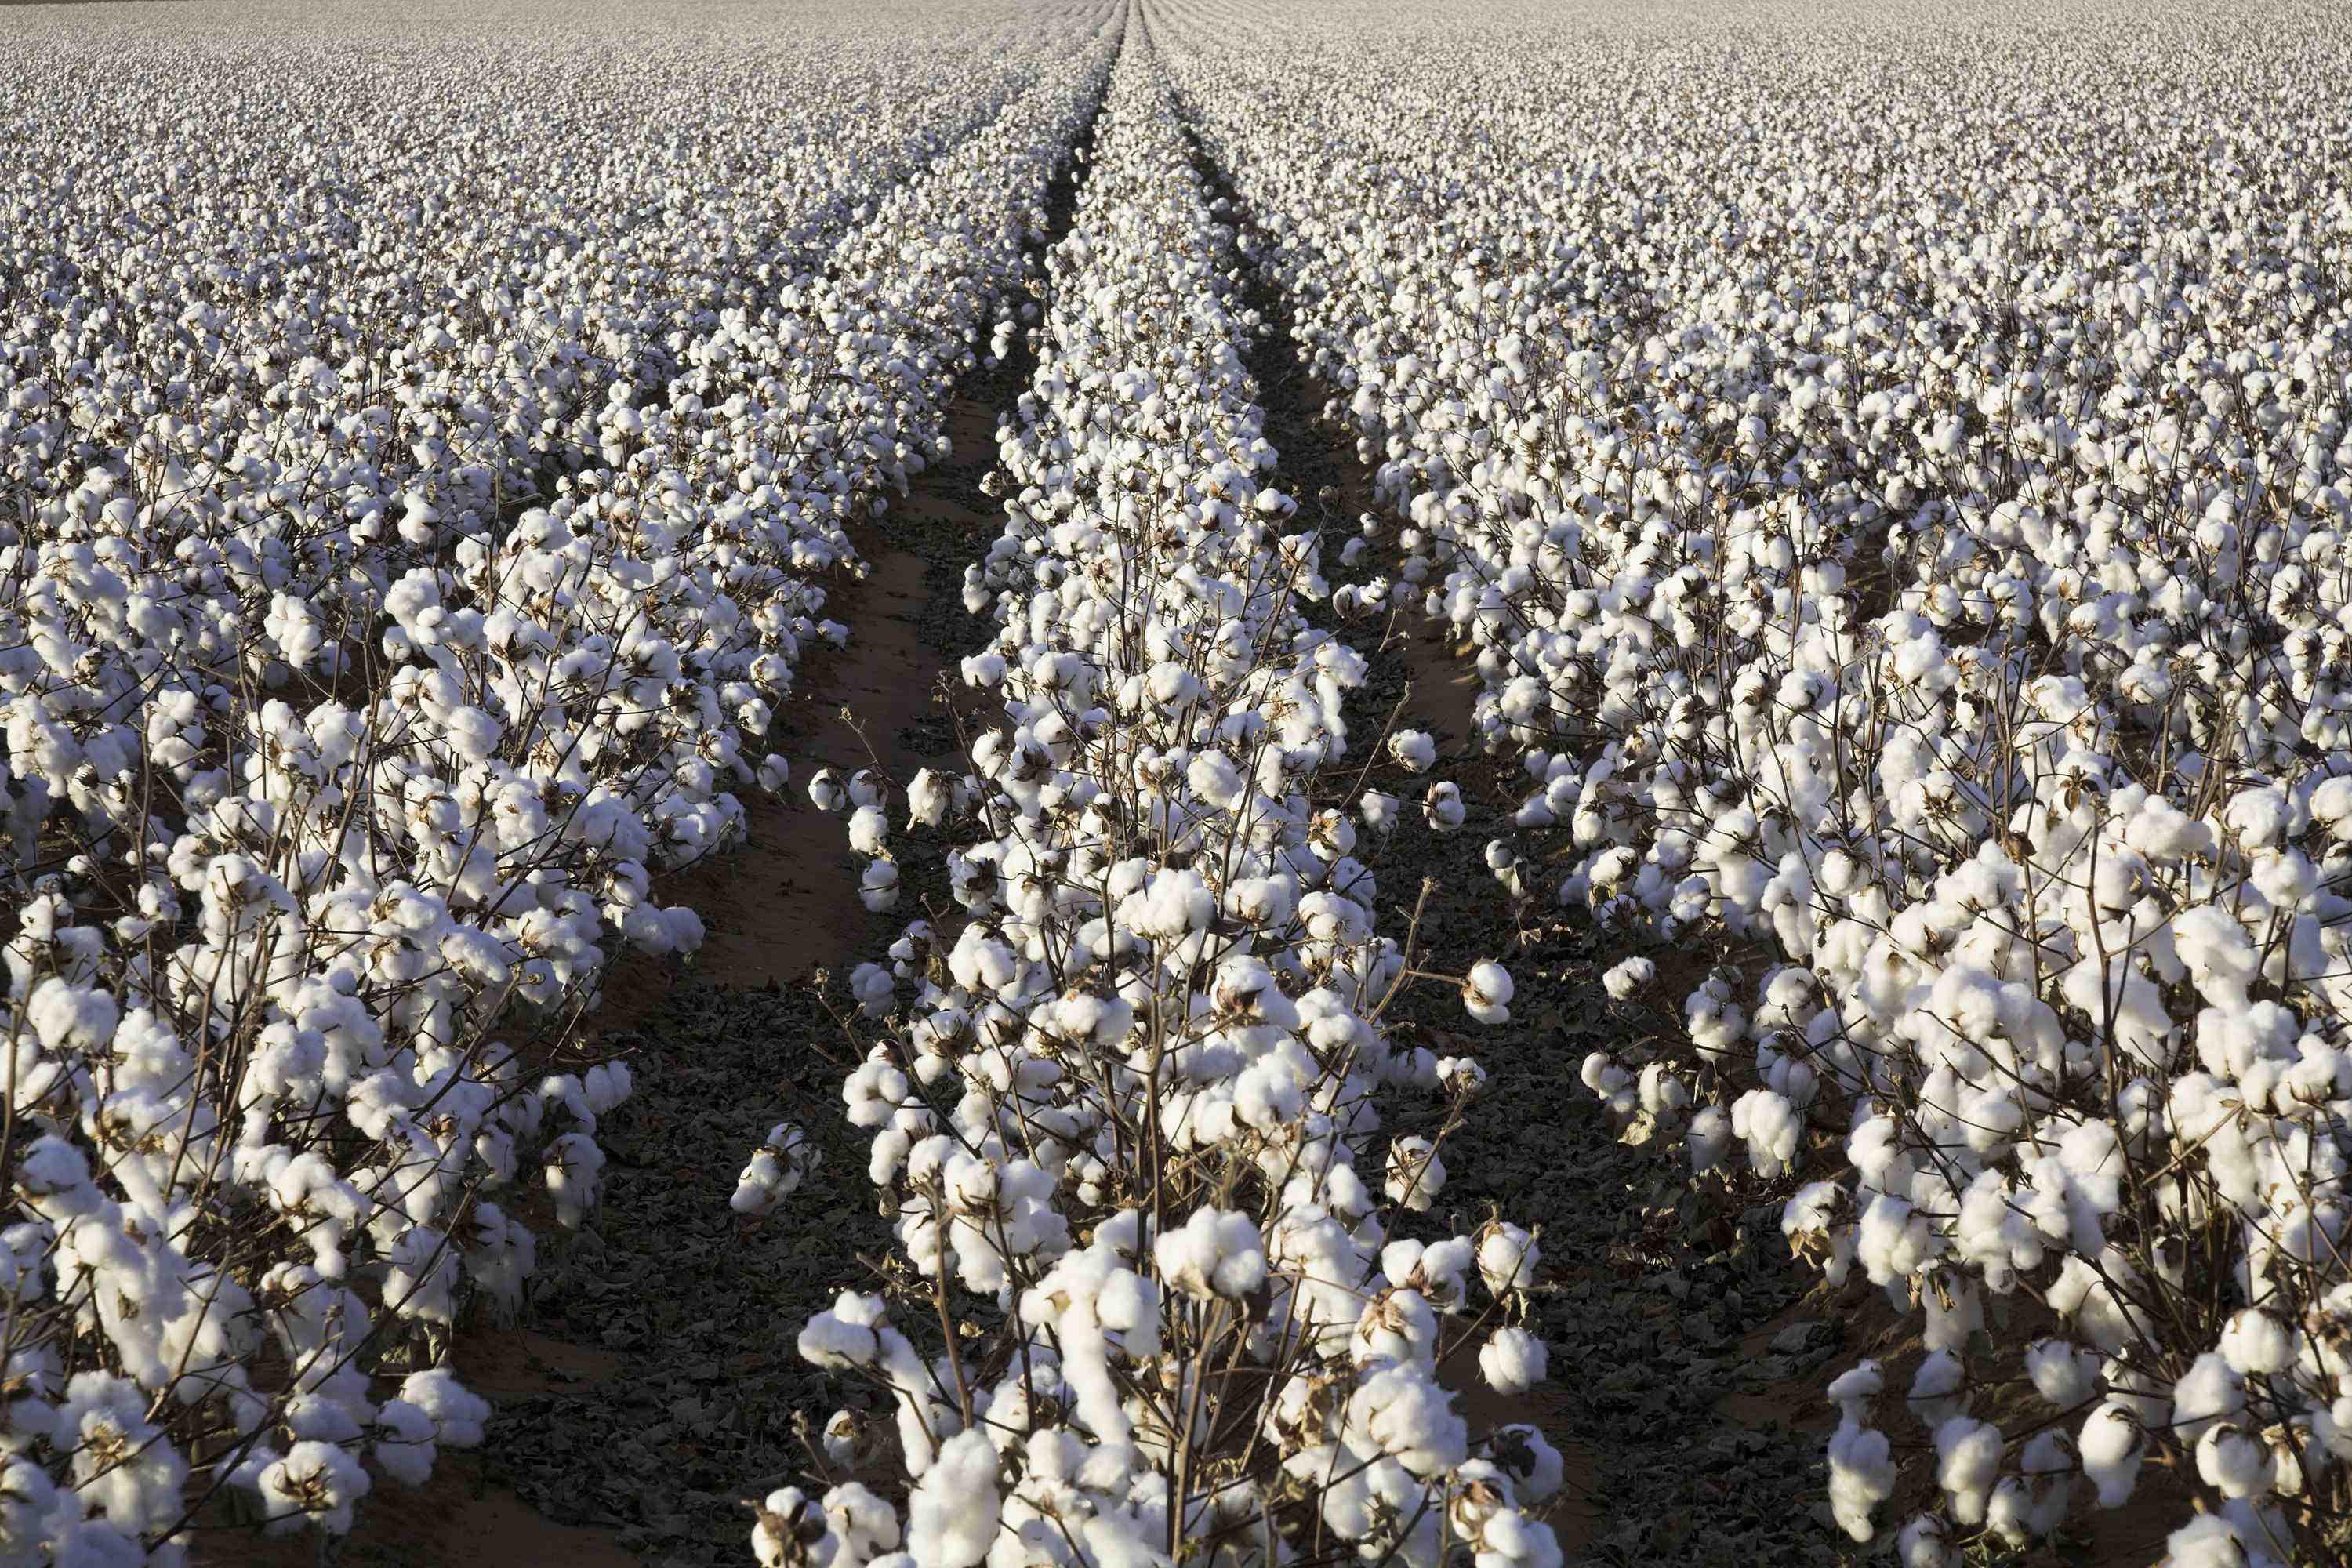 rows of white ripe cotton in field ready for harvest